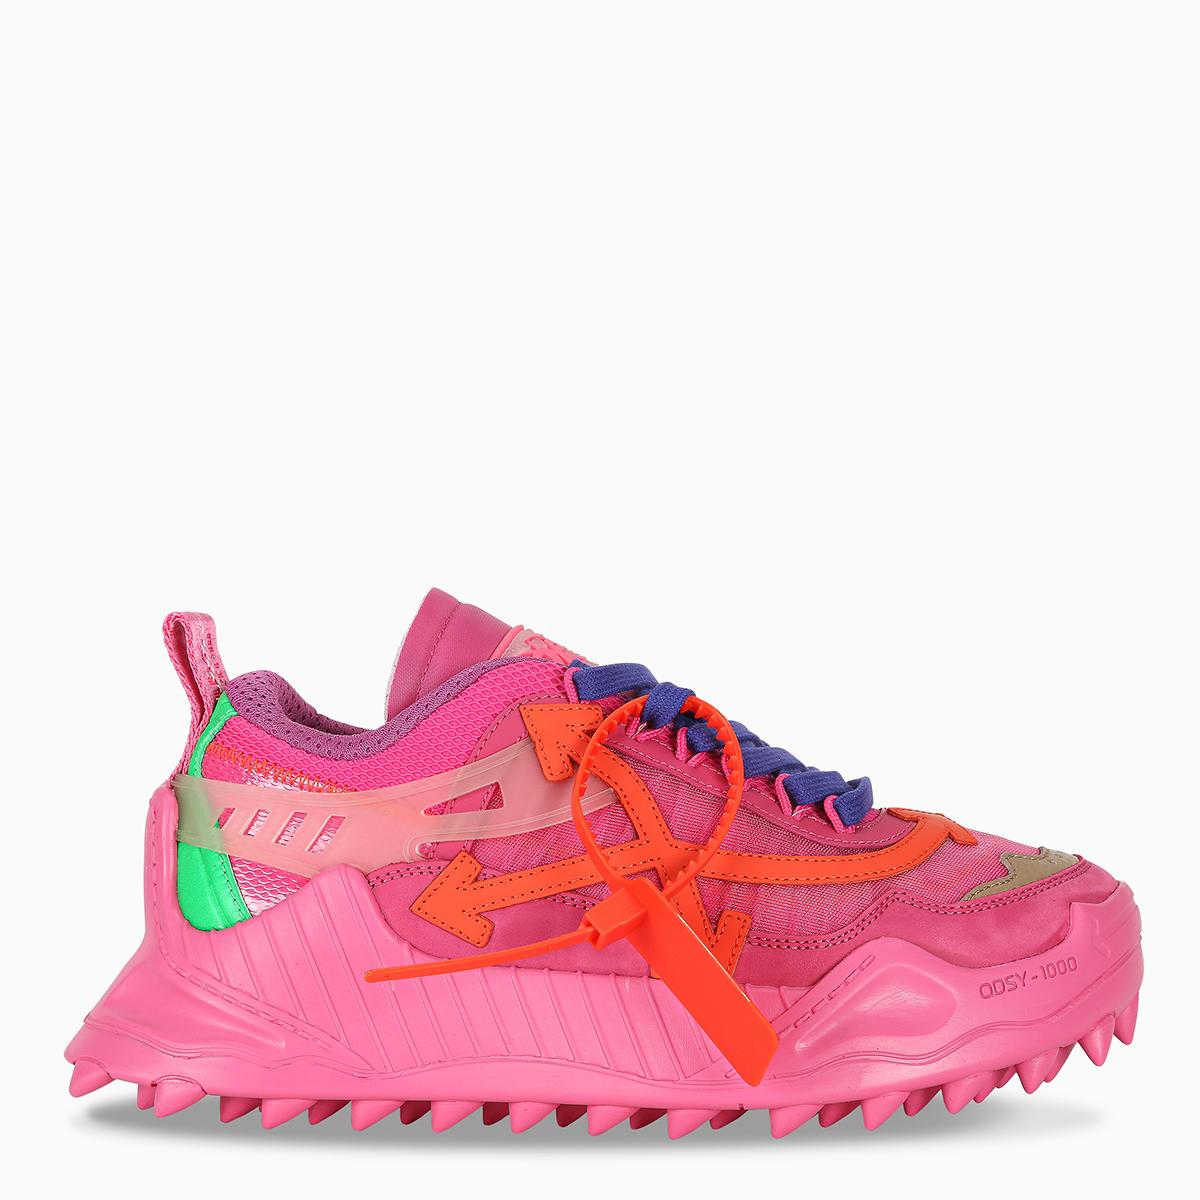 Off-White c/o Abloh Tm Fuchsia Odsy-1000 Sneakers in Pink - Lyst